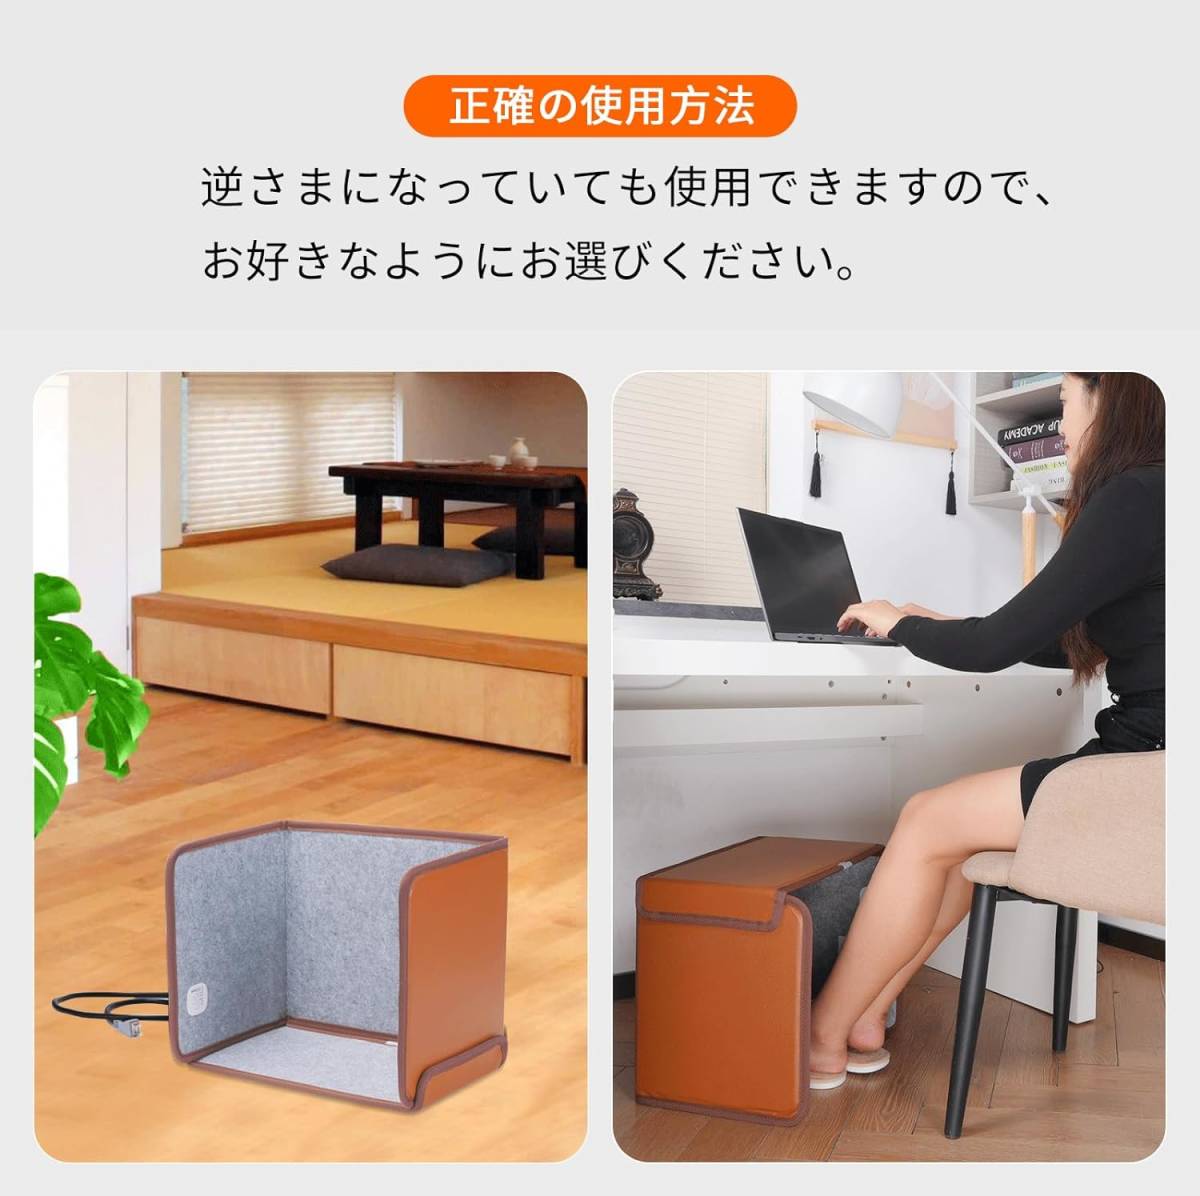  far infrared folding type panel heater underfoot heater remote control attaching energy conservation cold-protection office . a little over chilling . pair .. gently warming .